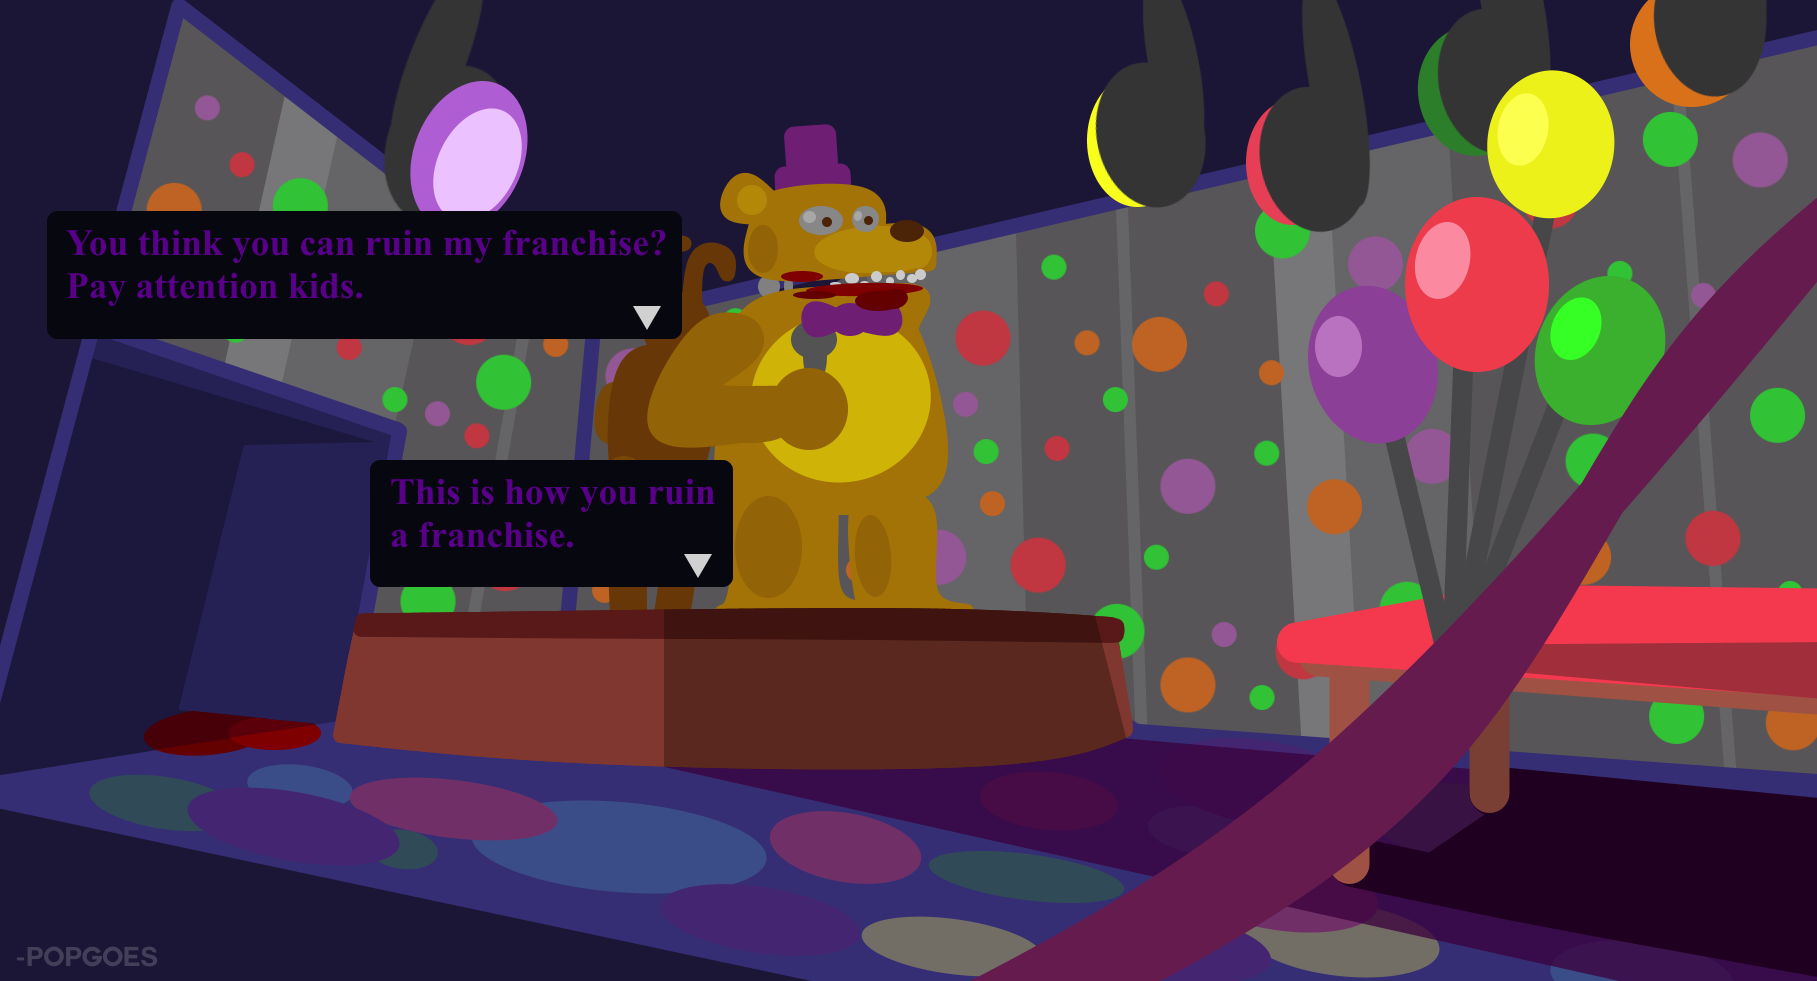 If you believe we play as the bite victim in FNaF 4, you cannot believe  that the kids outside in the minigames are murdered and become the toys.  The two theories contradict